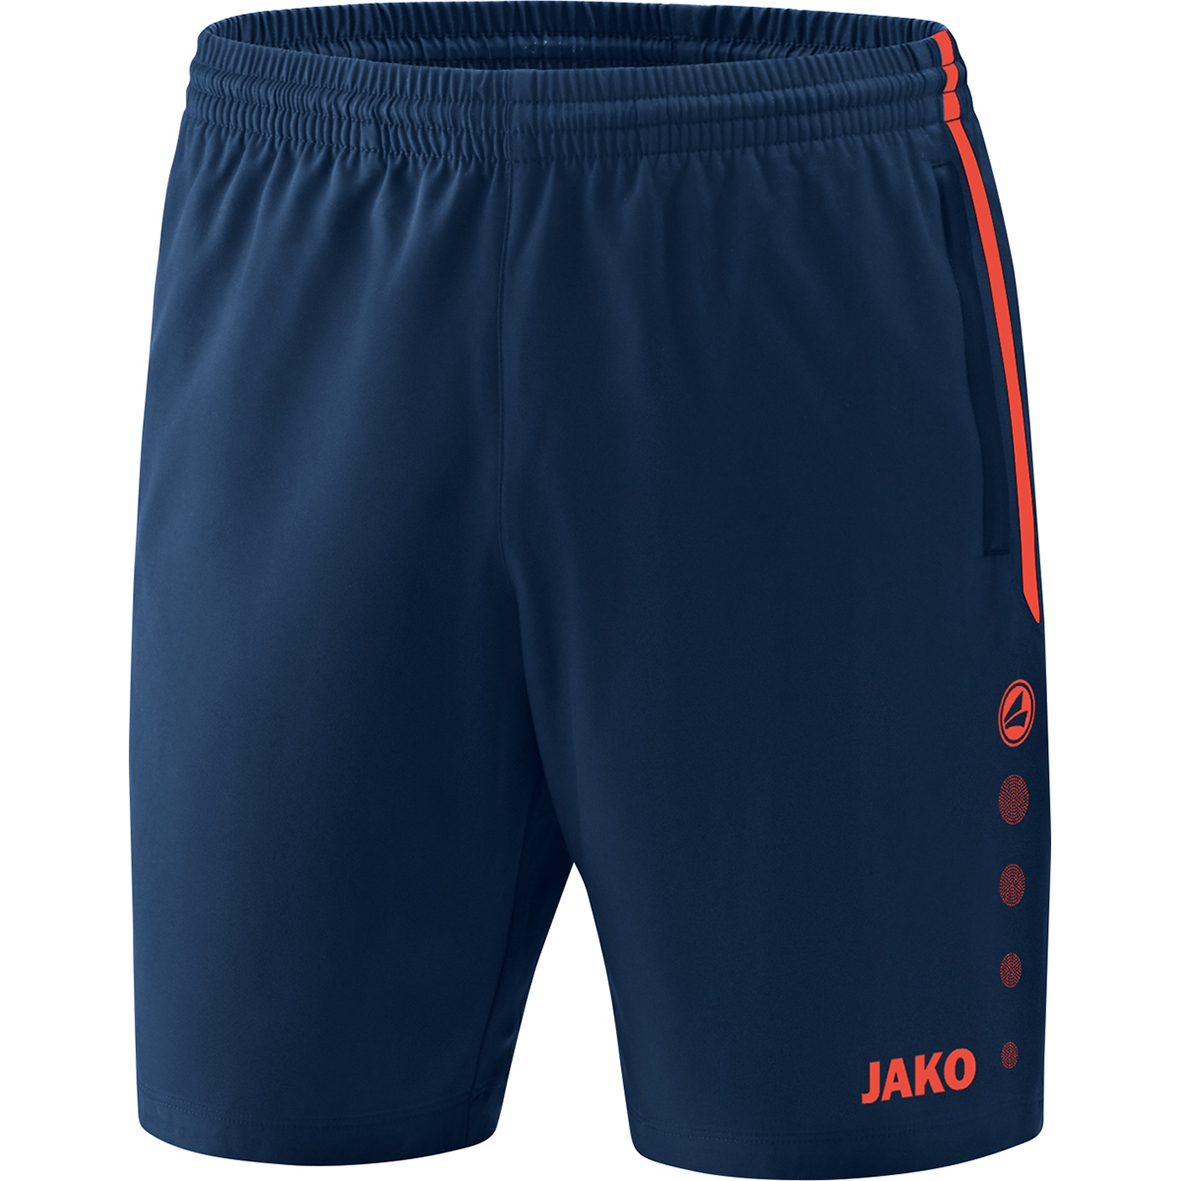 SHORTS JAKO COMPETITION 2.0, NAVY-FLAME MEN.